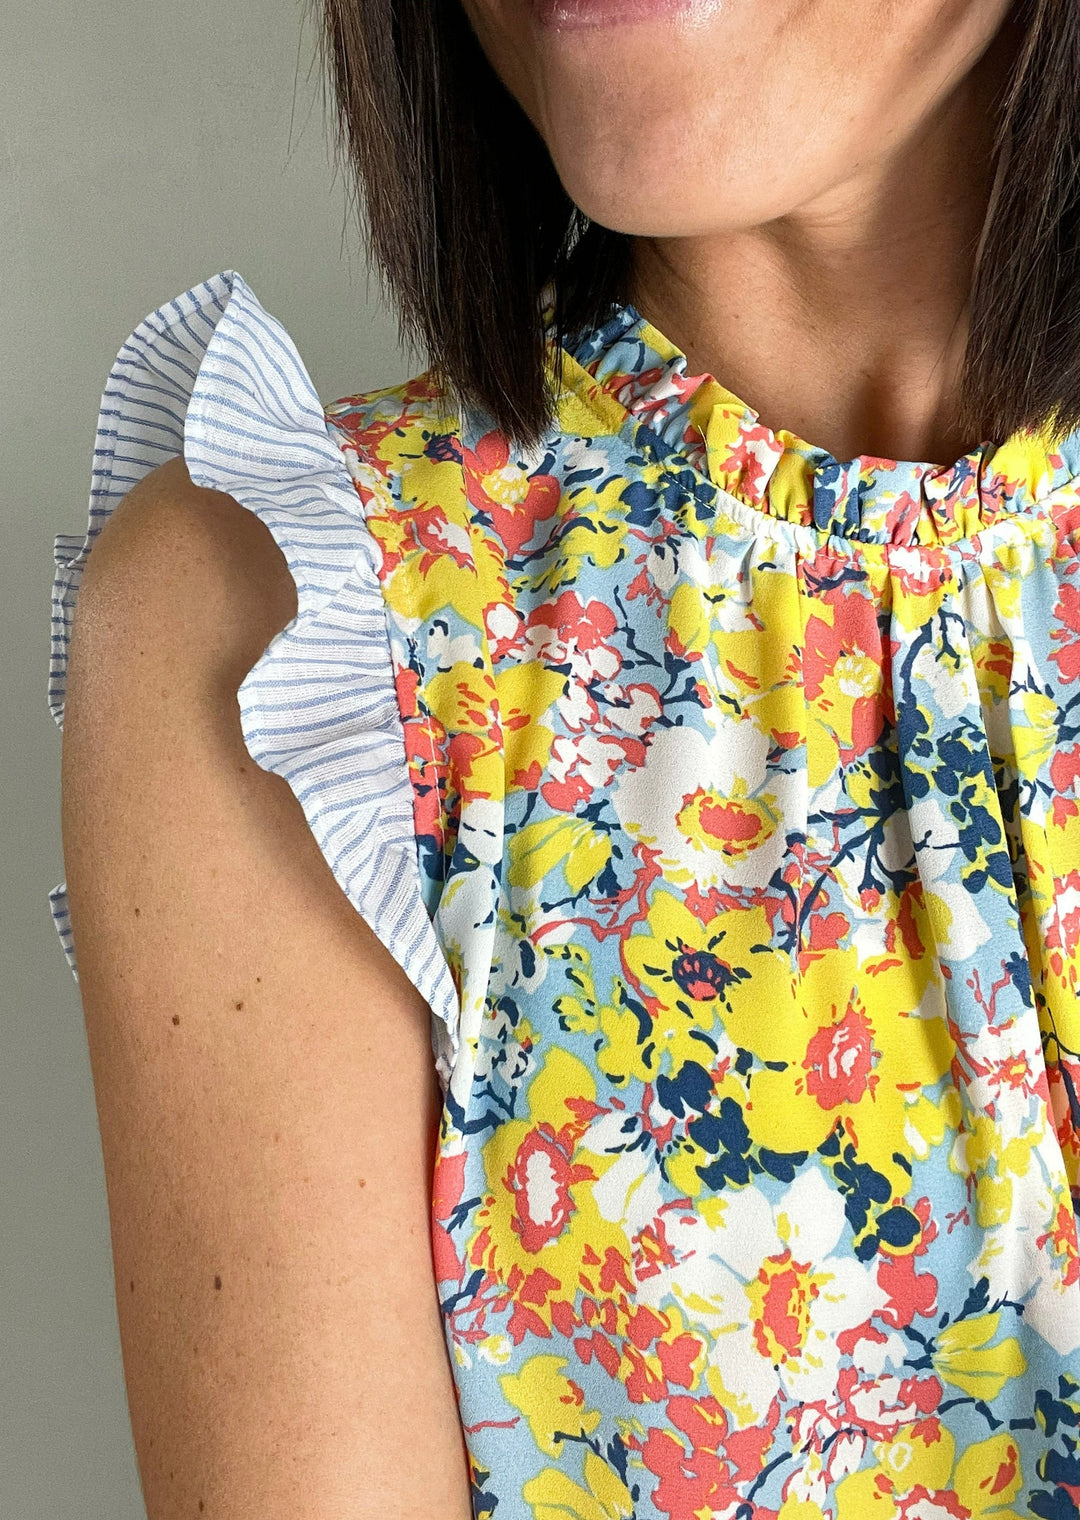 Orange and Yellow Floral Sleeveless Blouse with blue and white striped flutter sleeves.